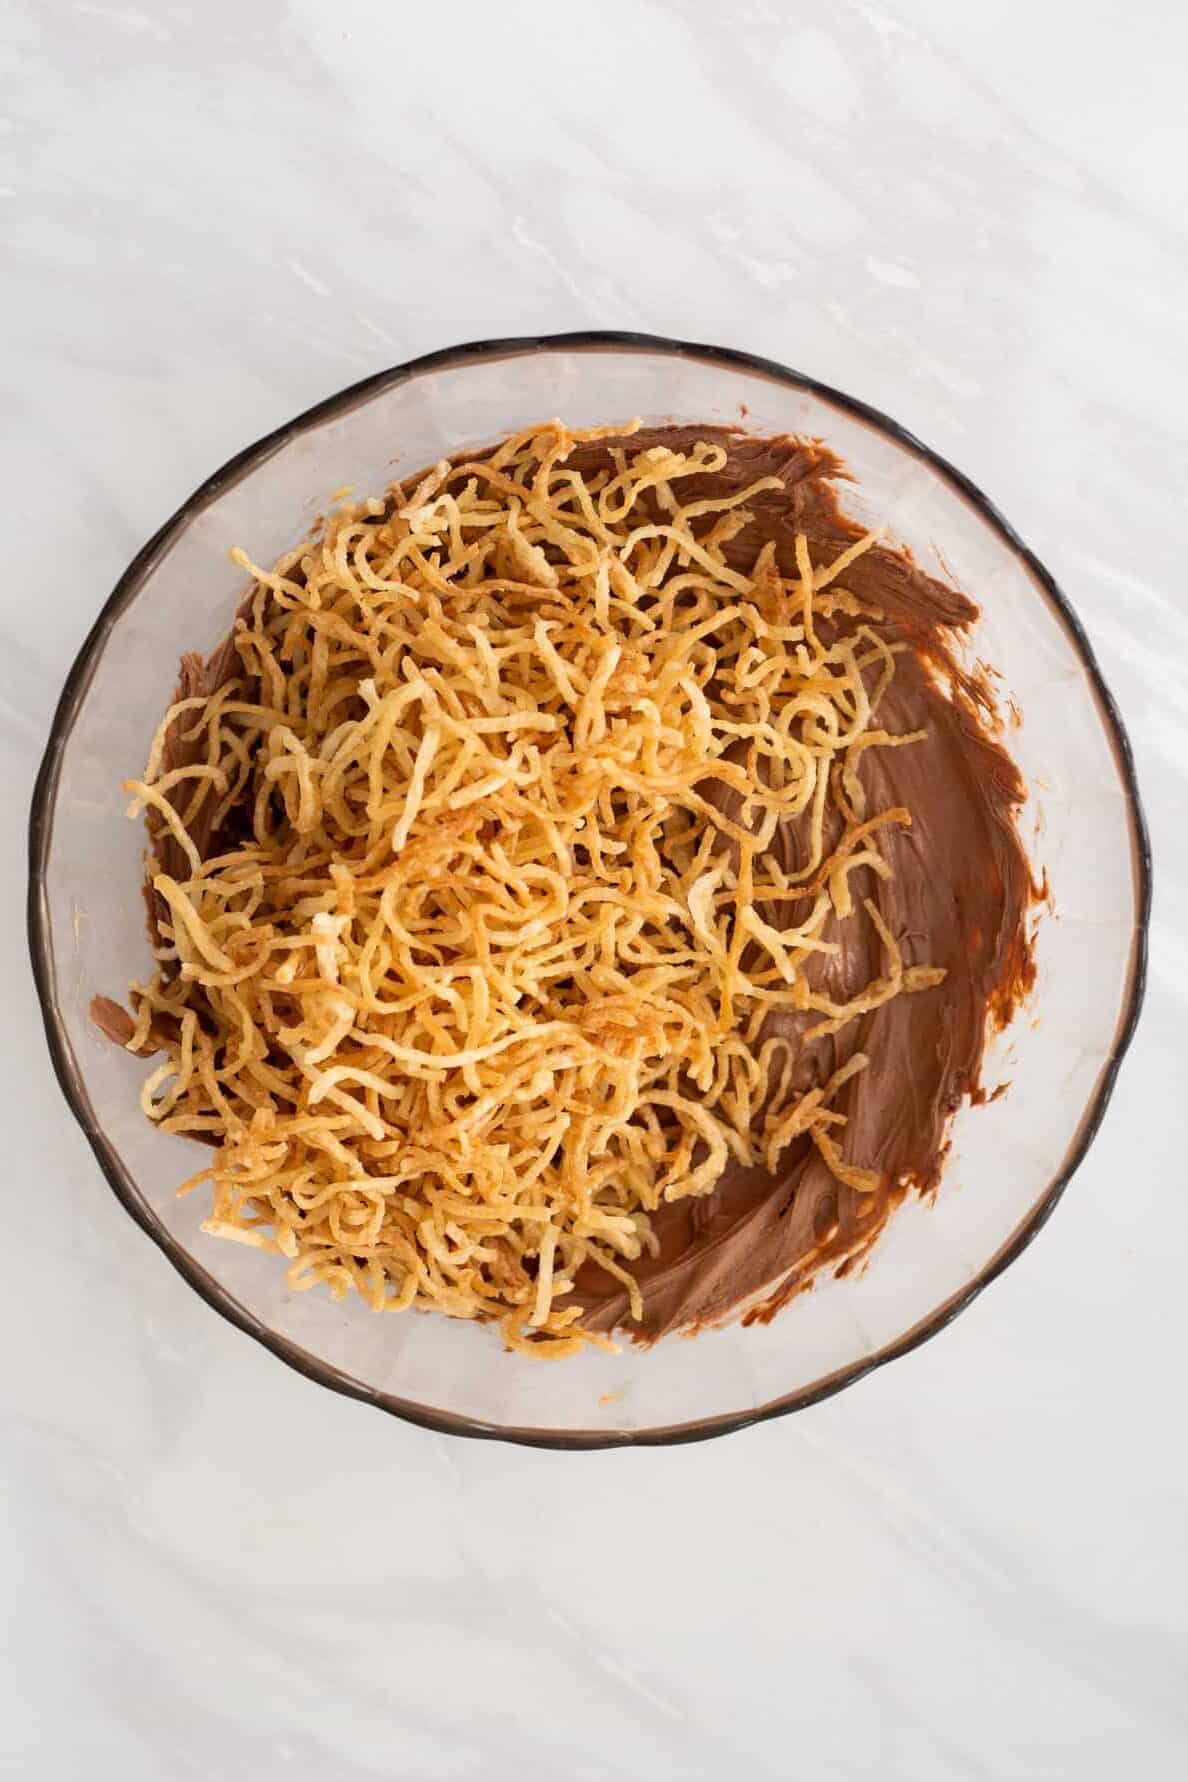 melted butterscotch chips, chocolate chips, peanut butter, vanilla extract and crispy chow mein noodles sitting in a large glass bowl. 